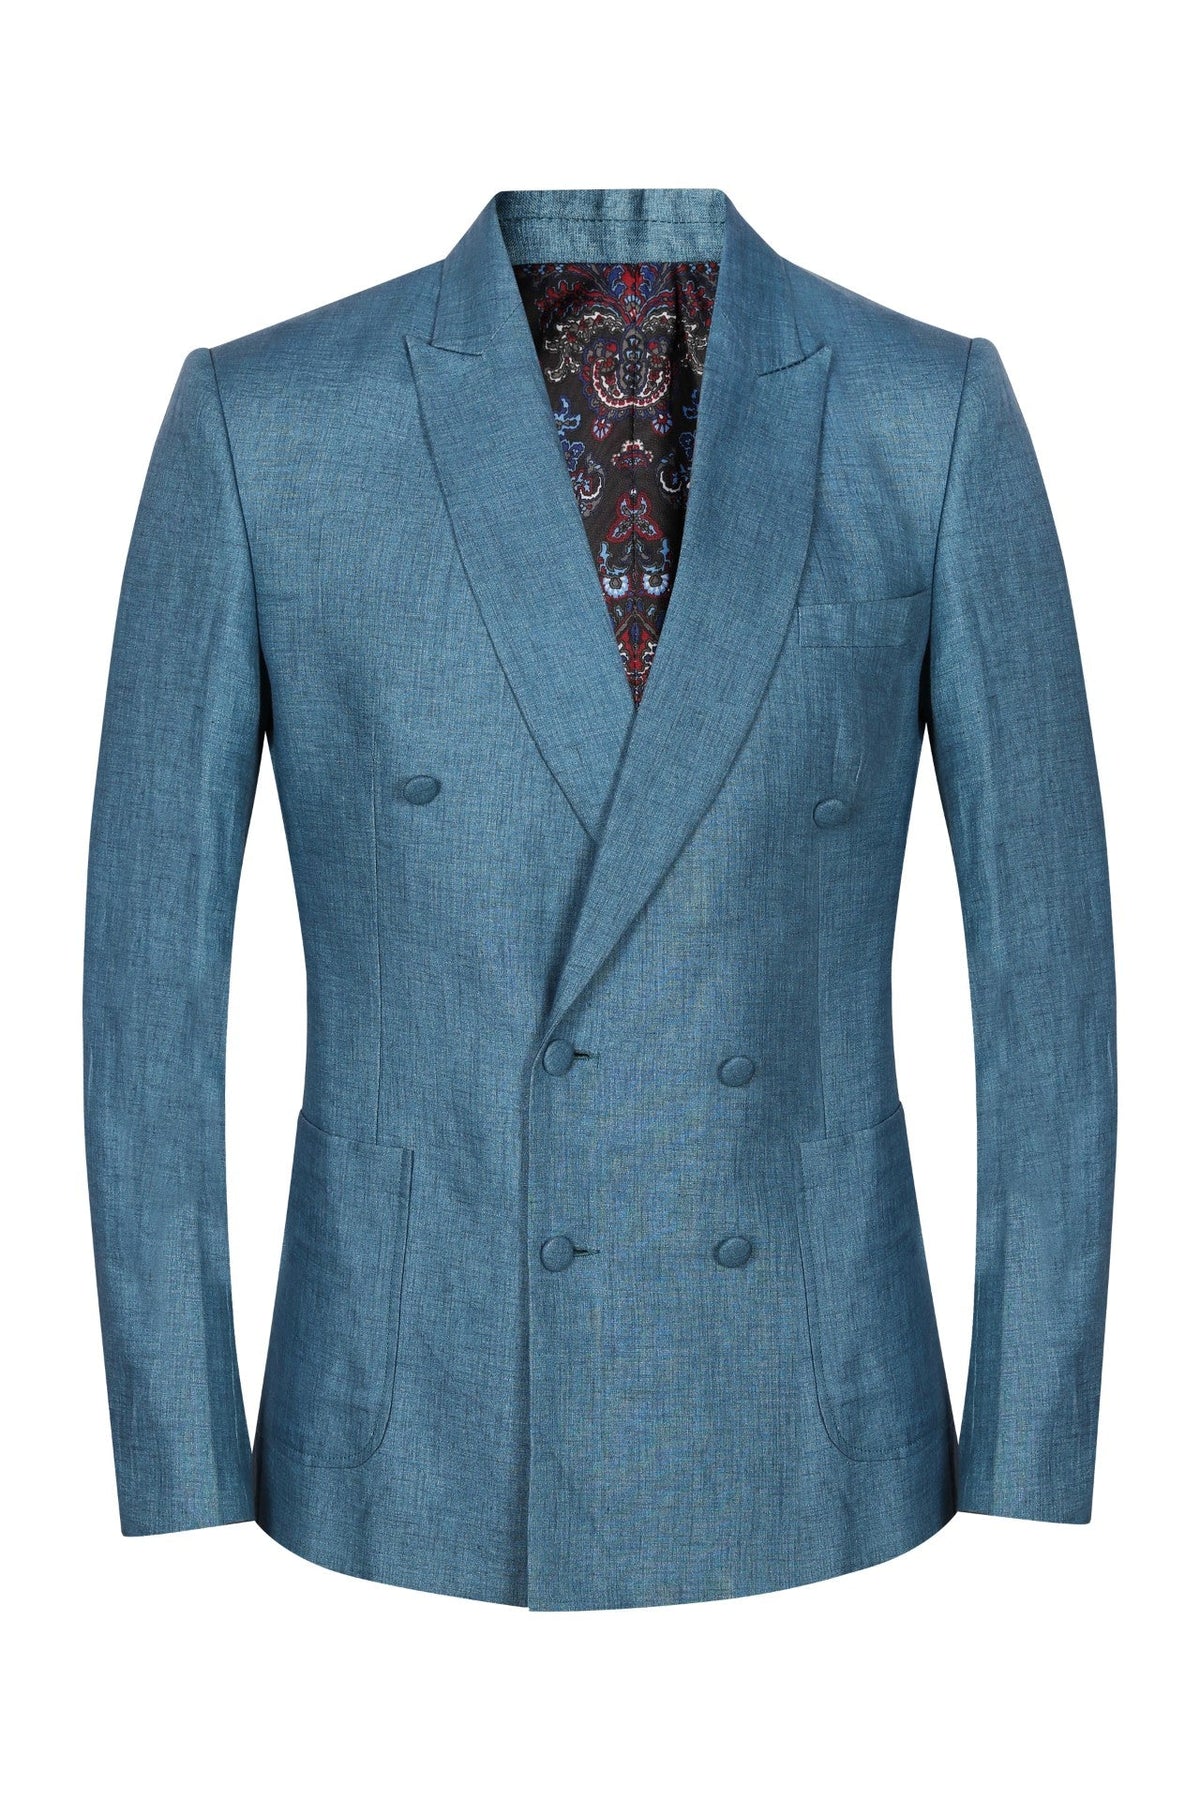 Blue linen jacket with a wing collar